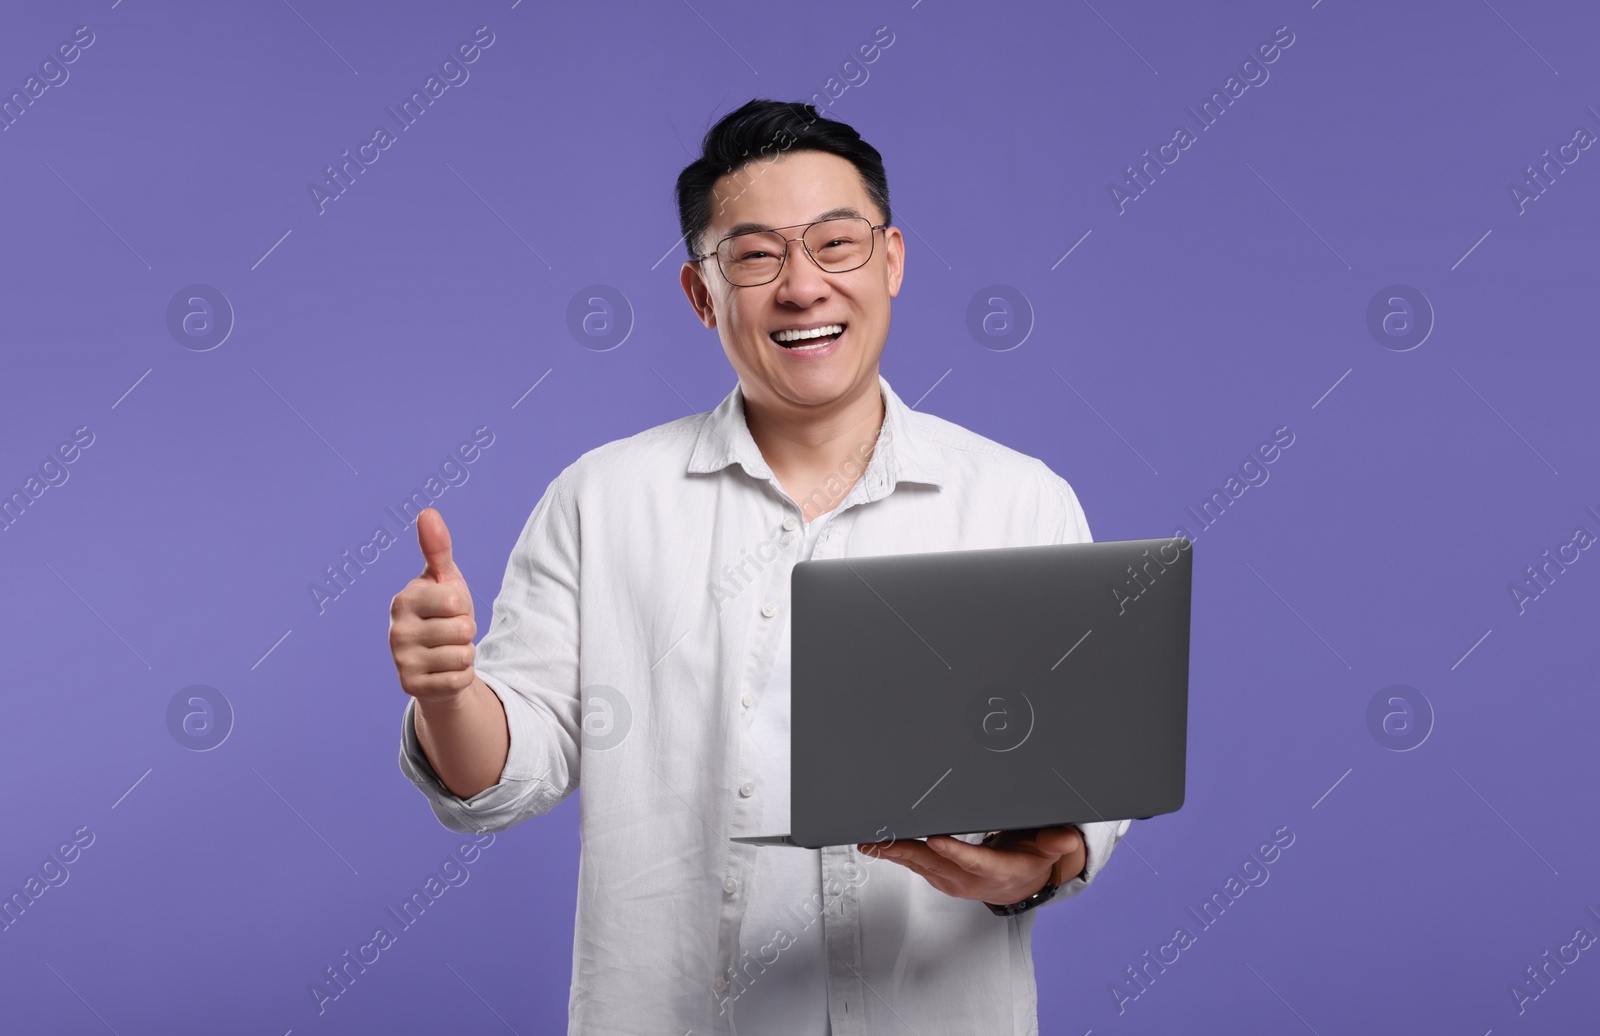 Photo of Happy man with laptop showing thumb up gesture on lilac background